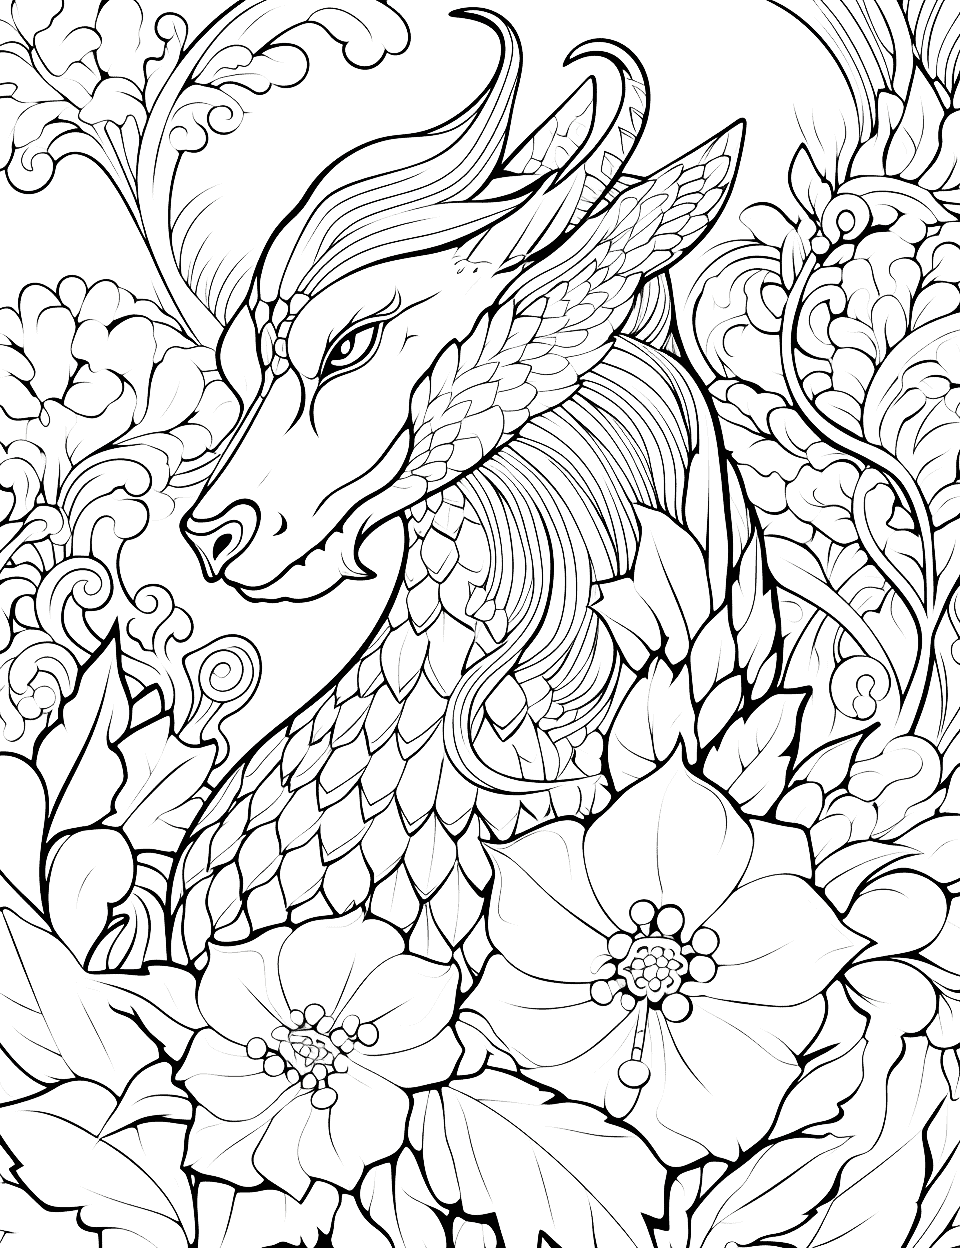 Dragon in a Floral Garden Adult Coloring Page - A dragon perched in a beautiful floral garden.